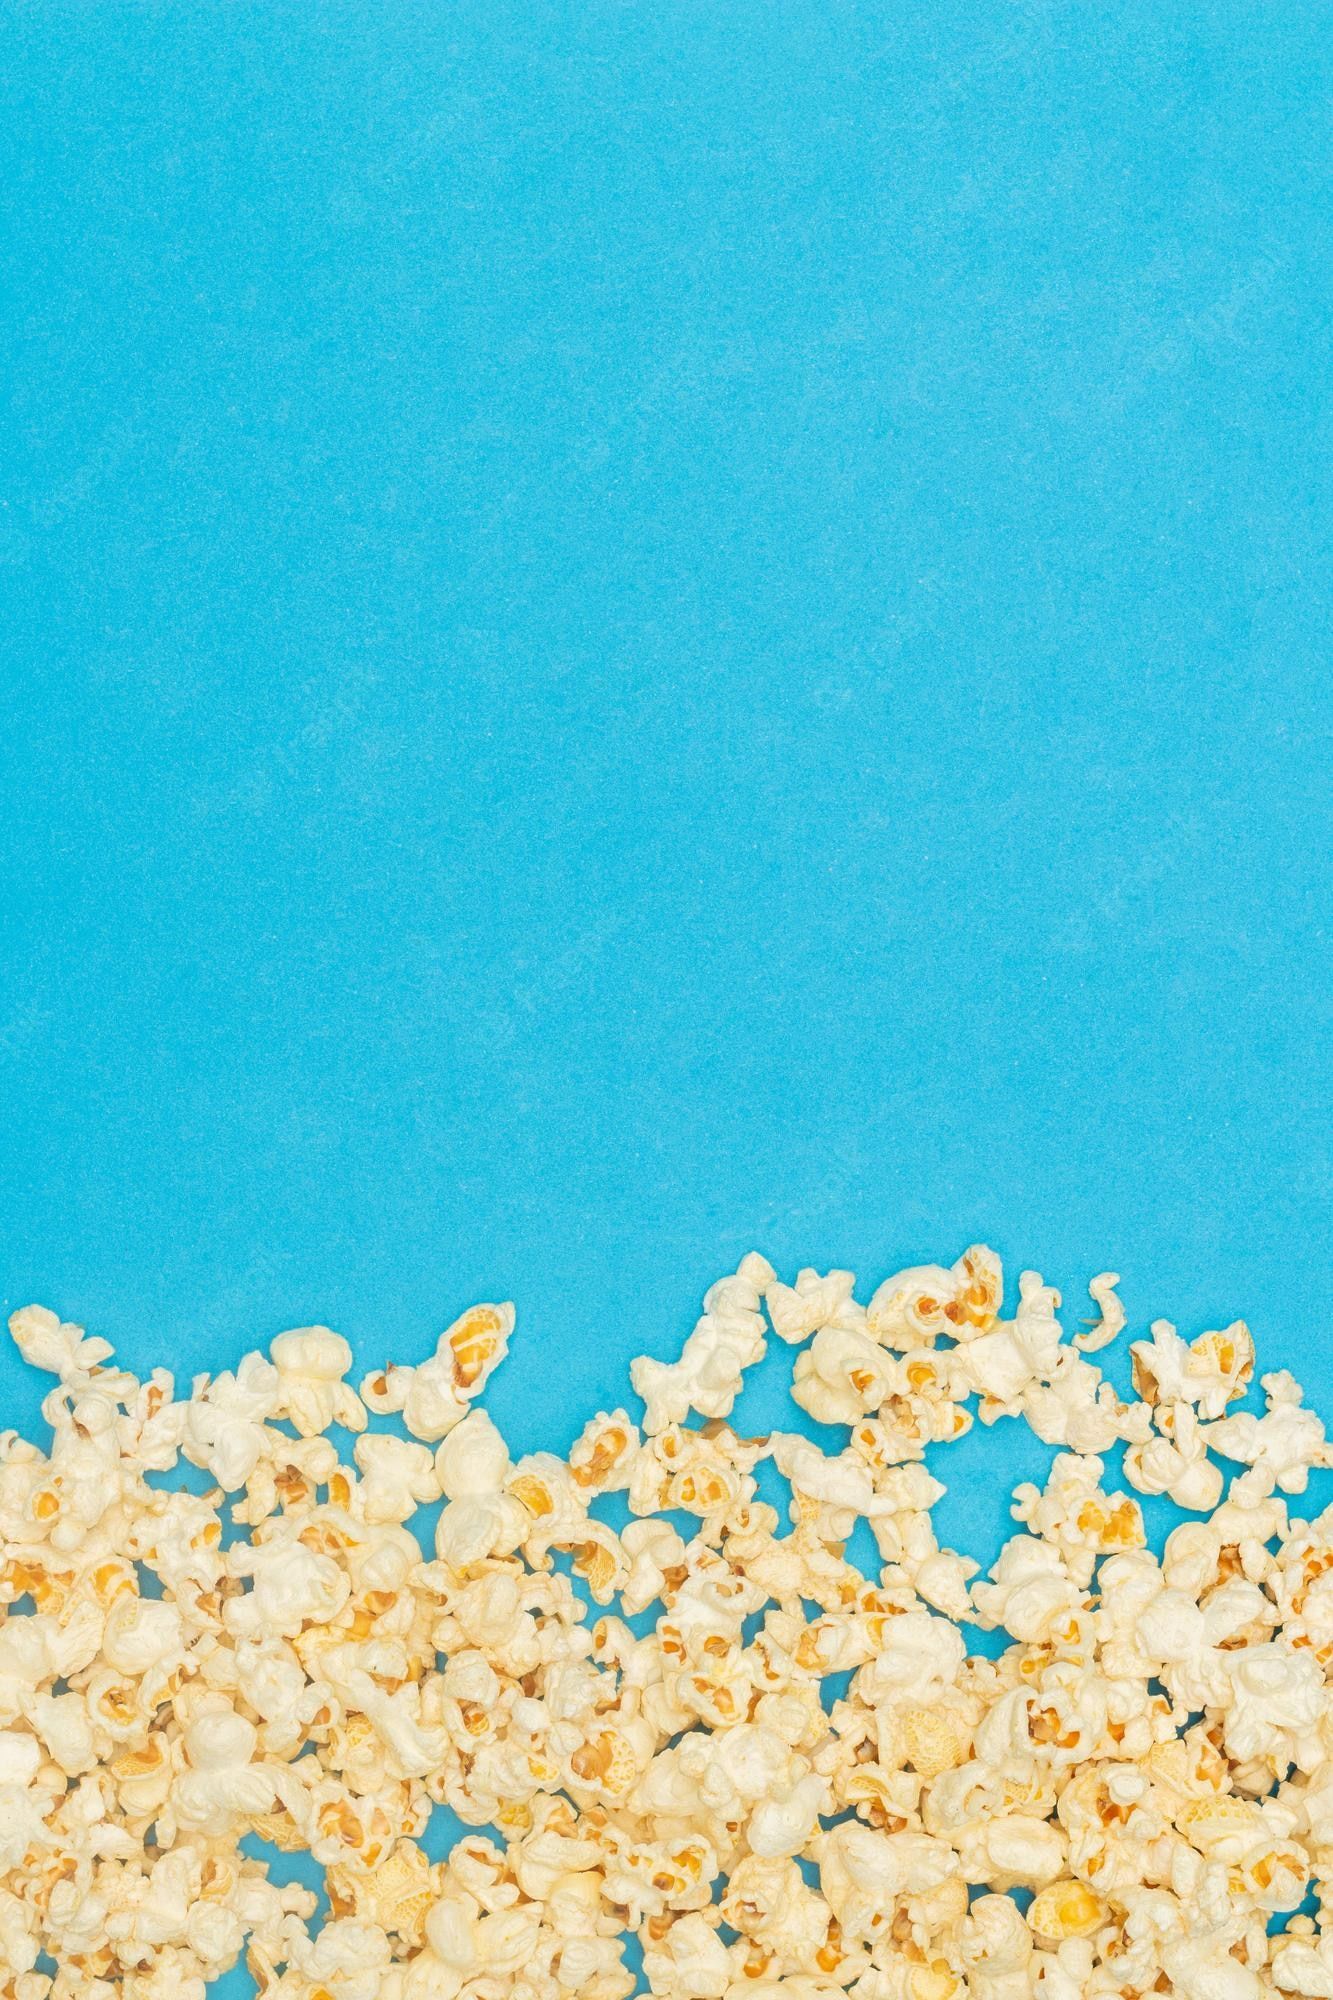 Premium Photo. Snack of watching movie concept sweet popcorn piled on light blue background